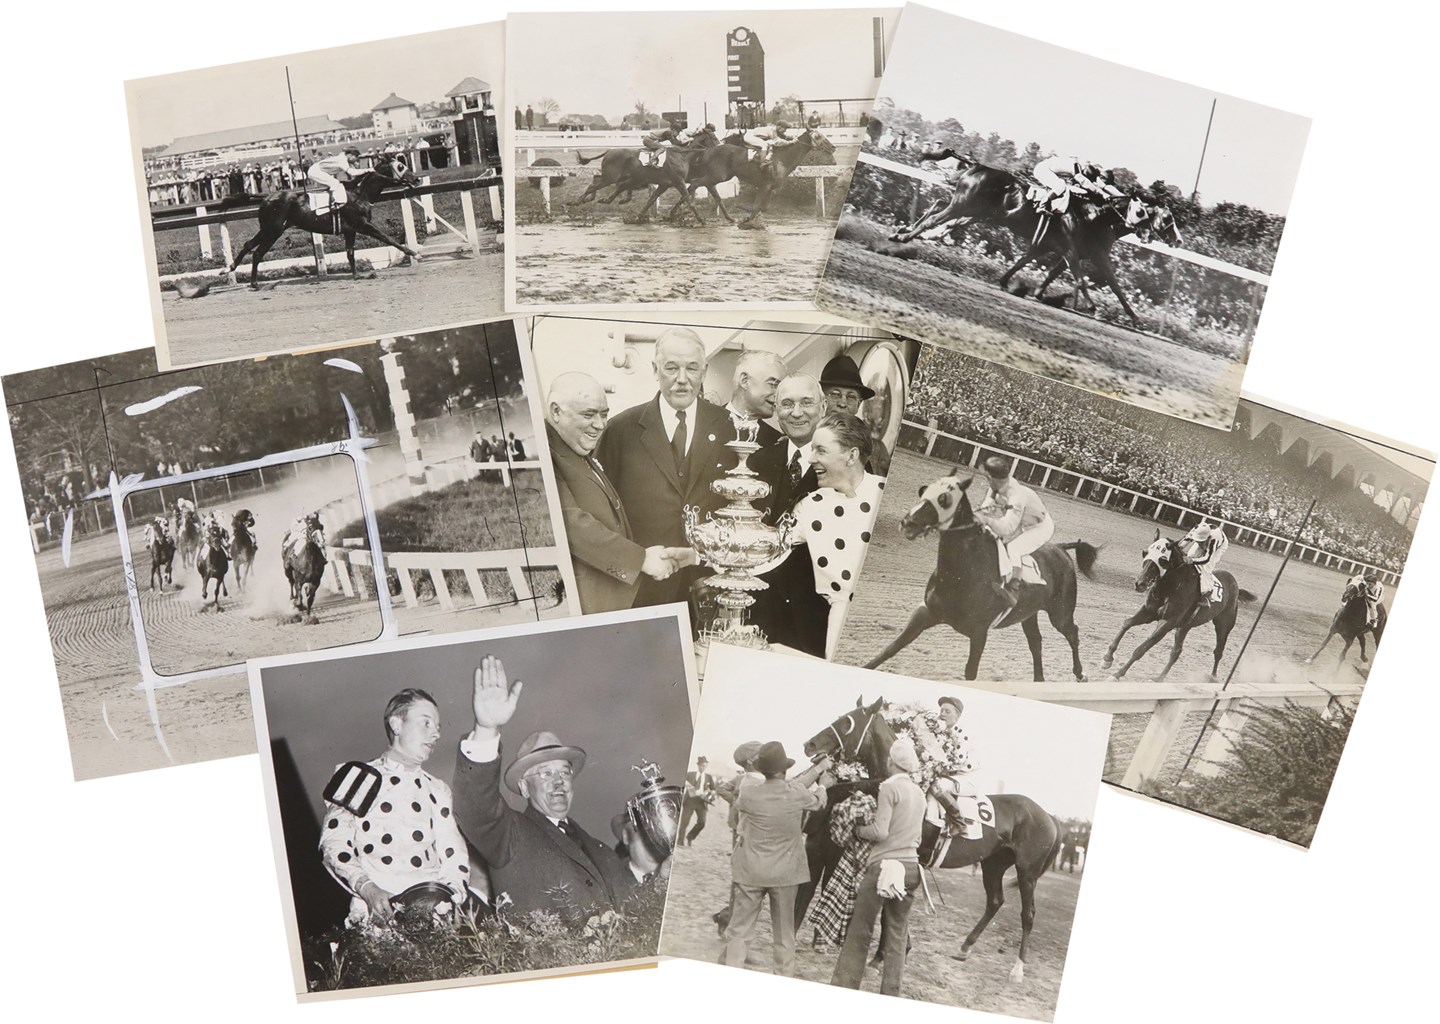 Horse Racing - Triple Crown Winner, Omaha, & Equipoise, Important Racehorses of The 1930s (35)